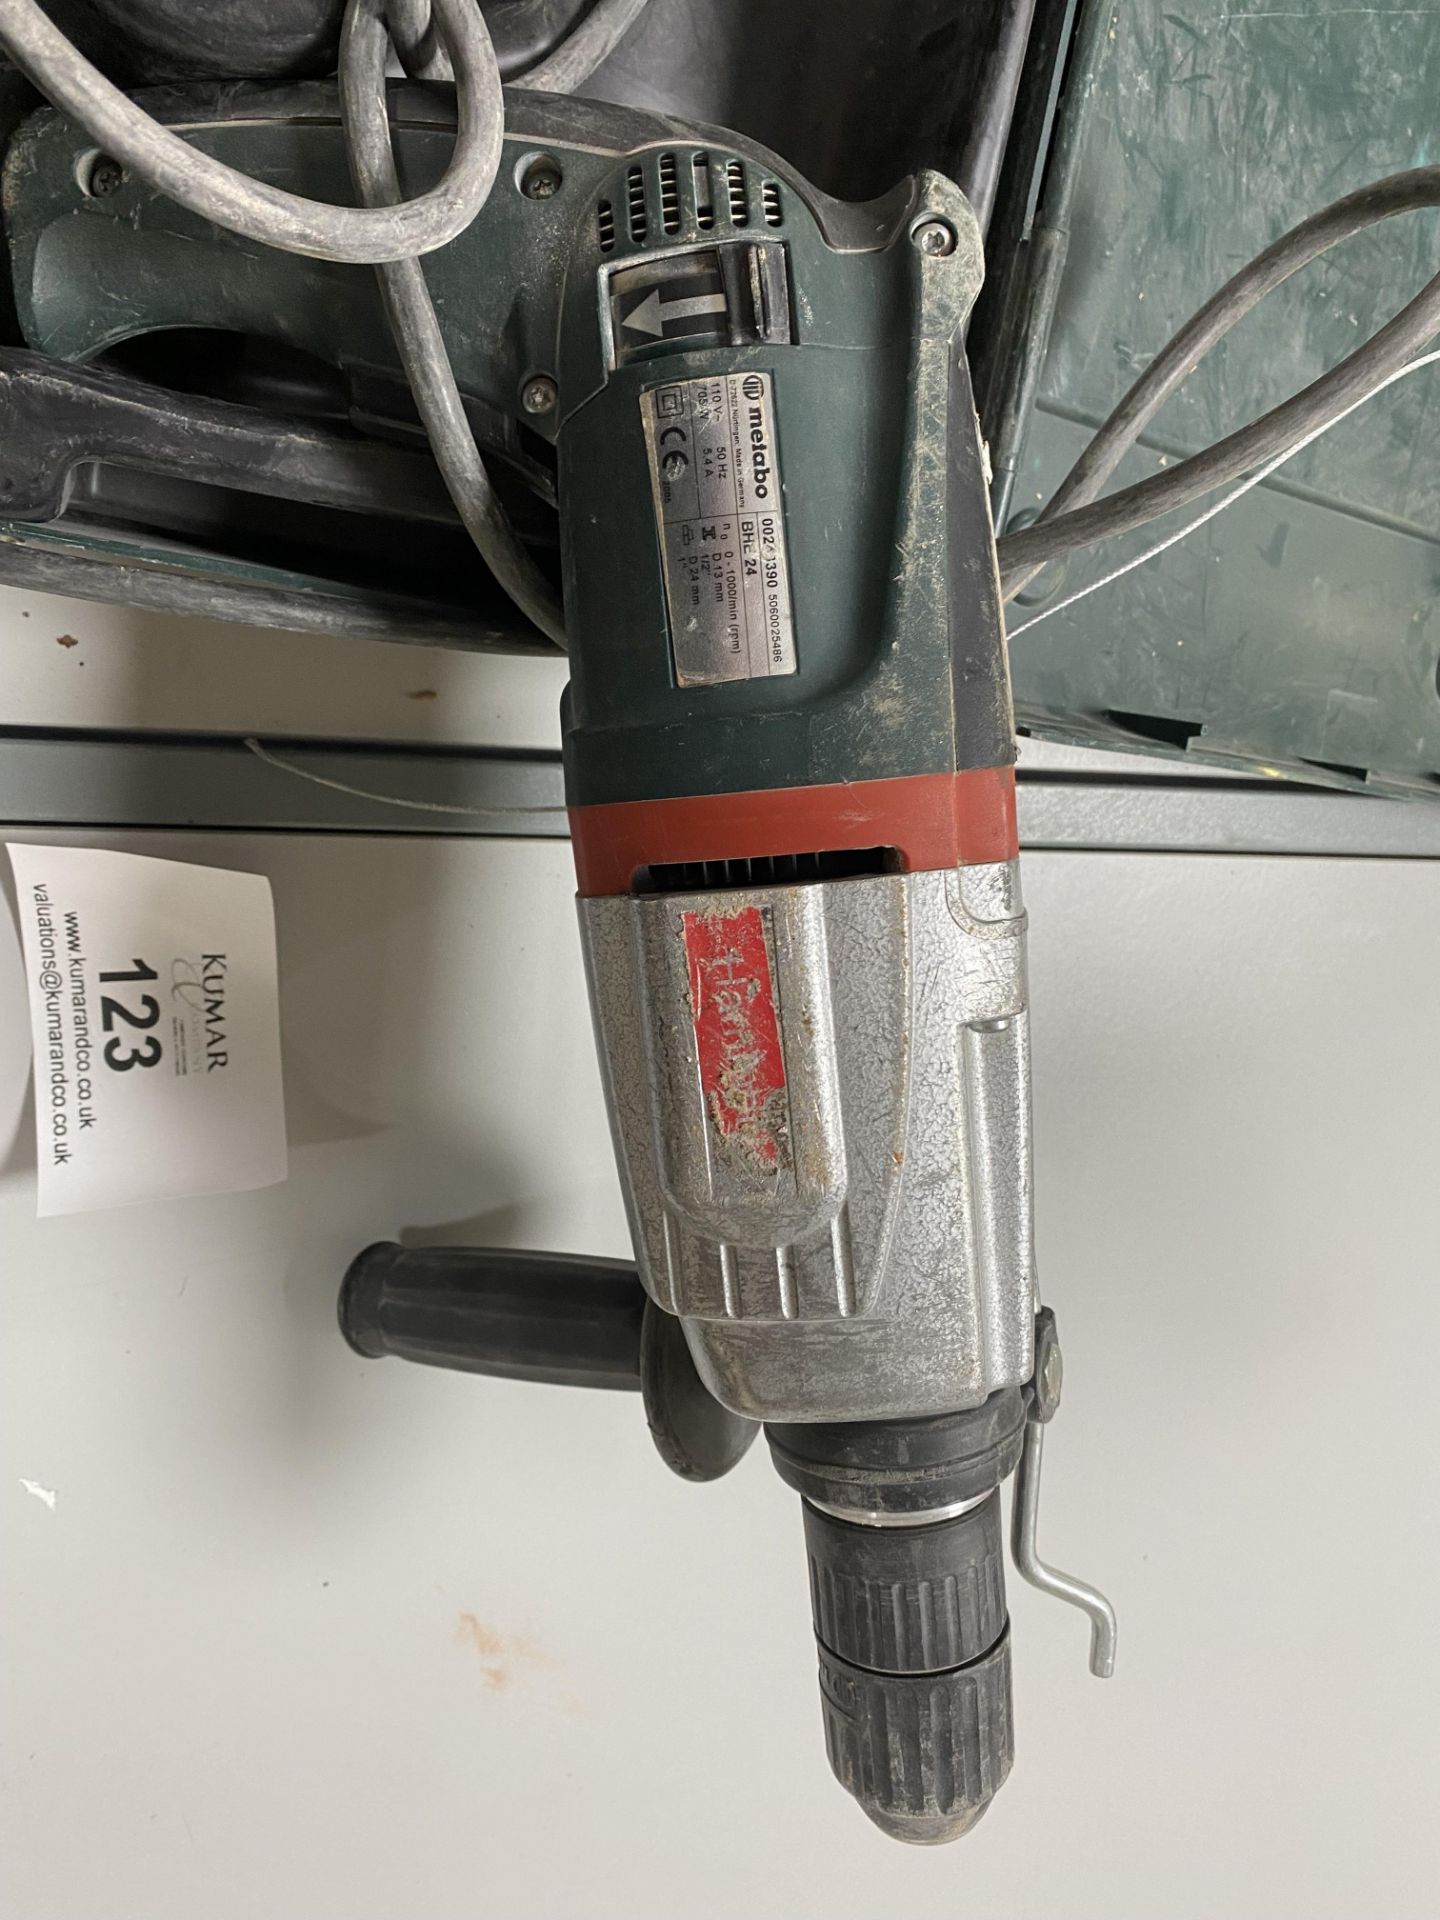 Metabo BHE24 110V Rotary Hammer Drill with Carry Case, Serial No. 00243390 - Image 4 of 7